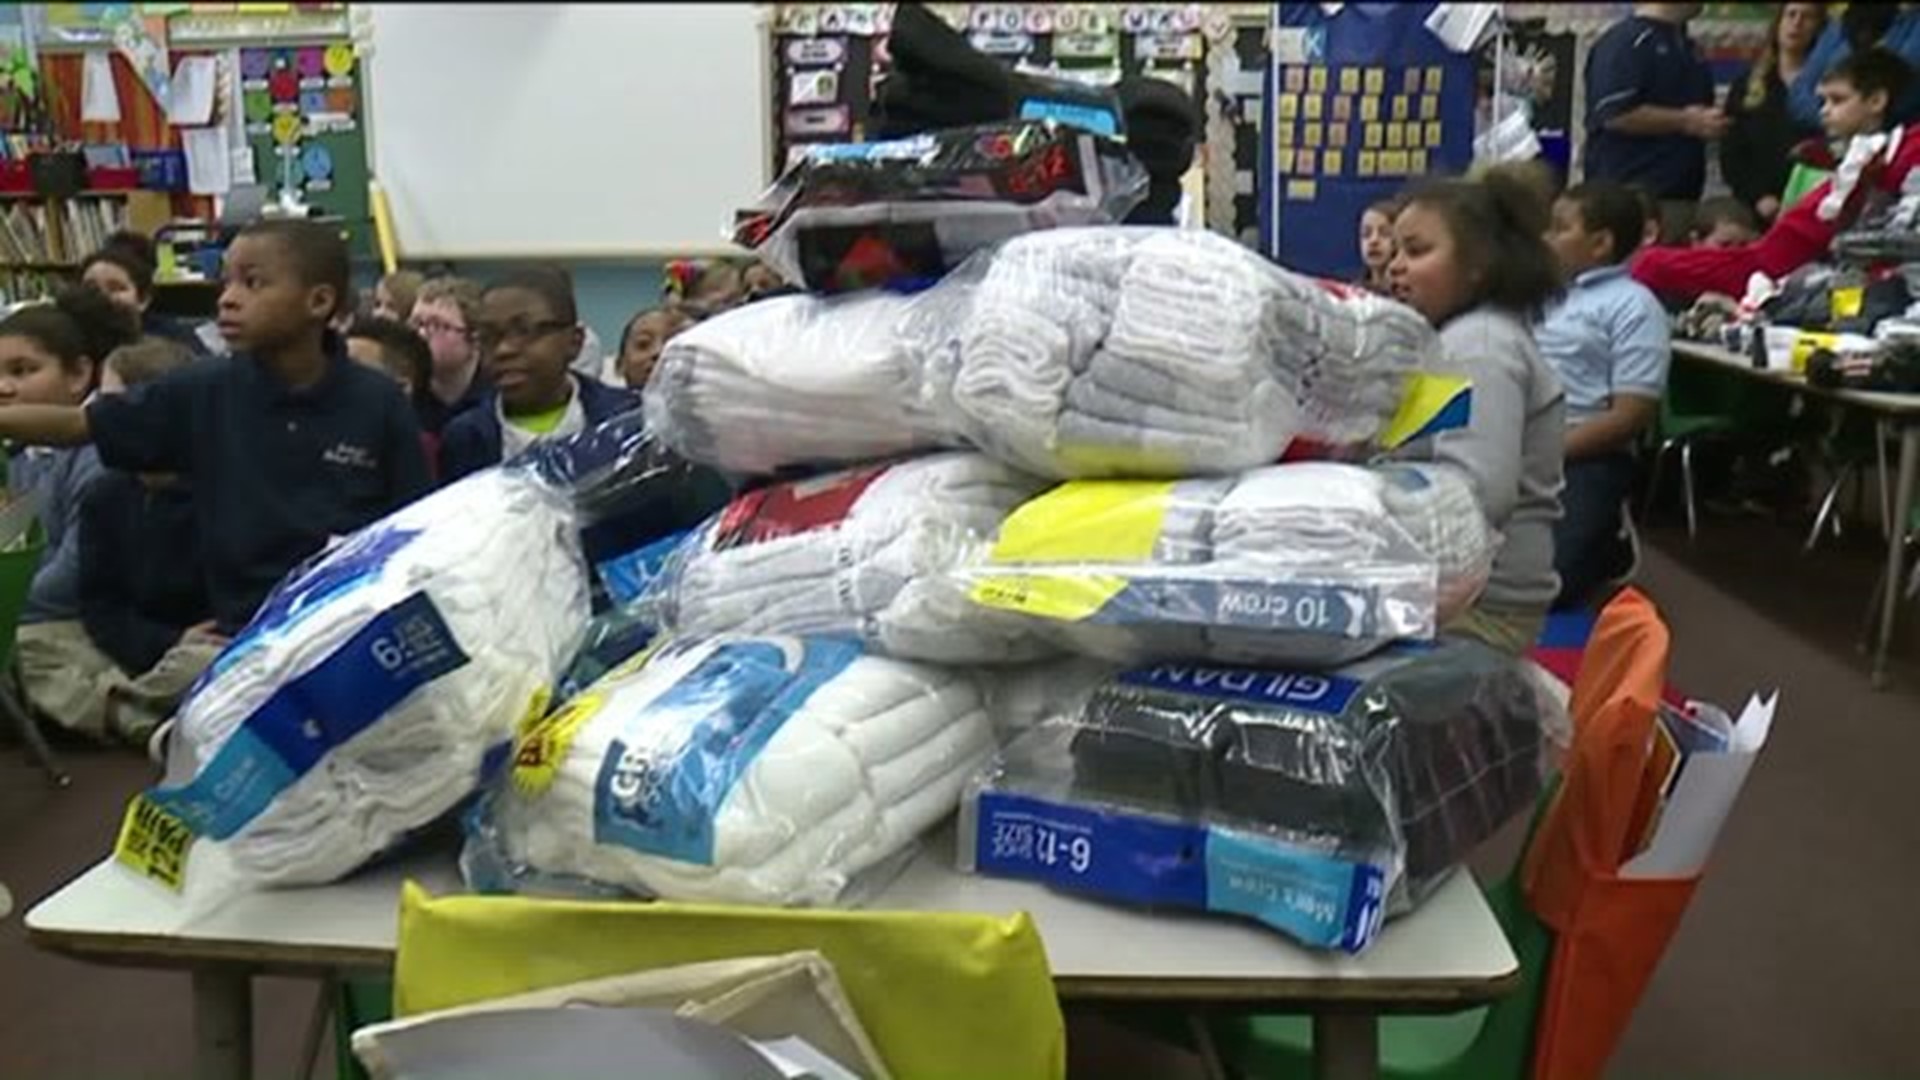 Students Collect 1,000 Pairs of Socks for Homeless